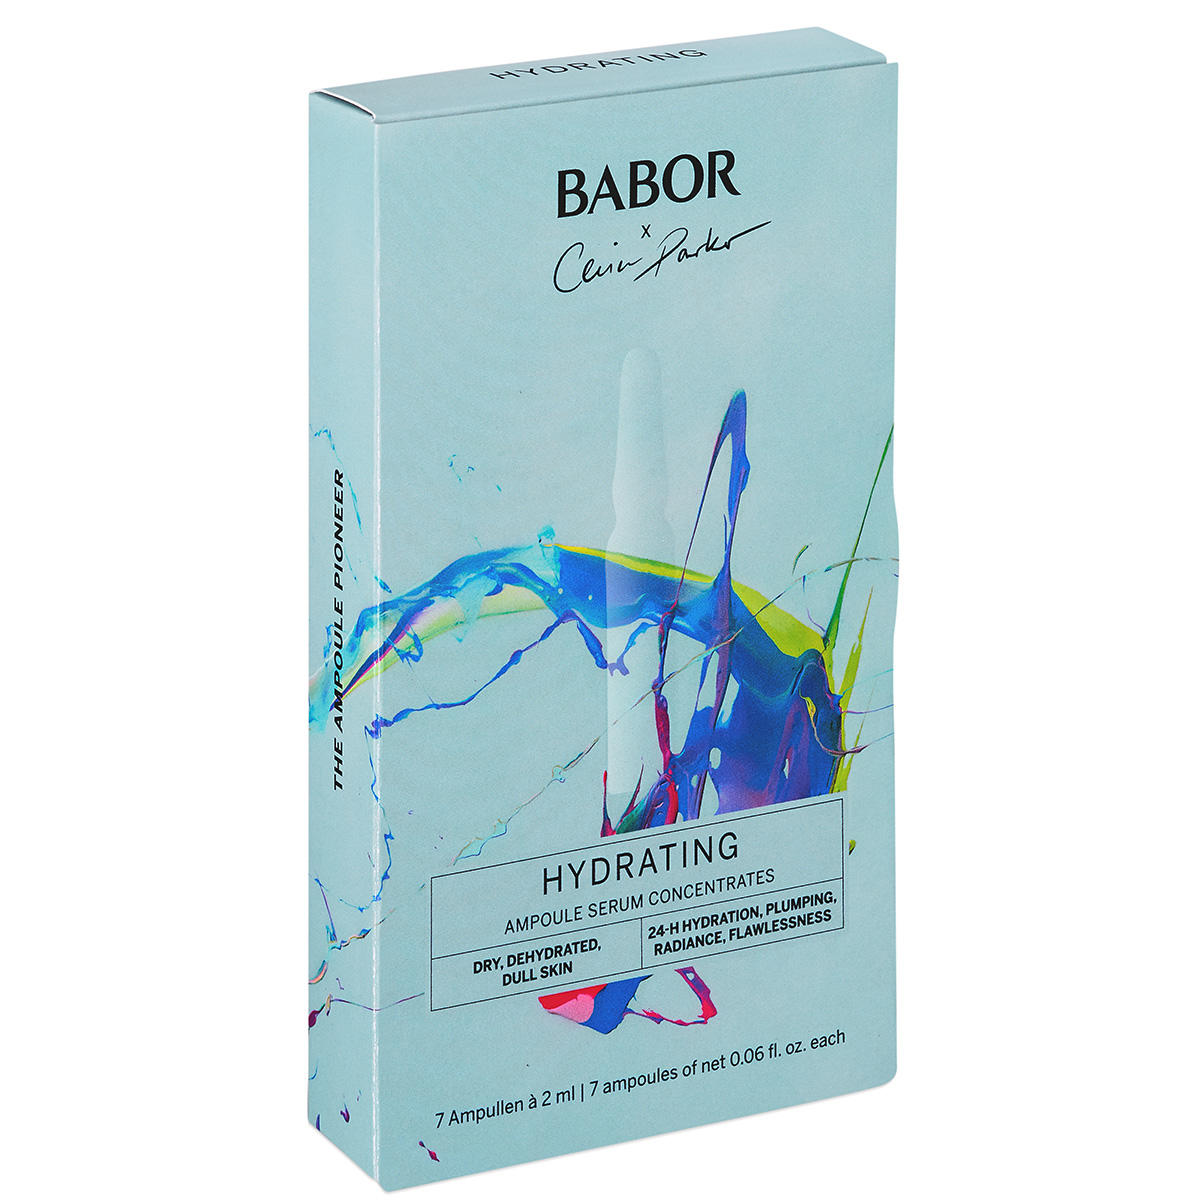 BABOR AMPOULE CONCENTRATES Hydrating Ampoule Limited Edition 7 x 2 ml - 2